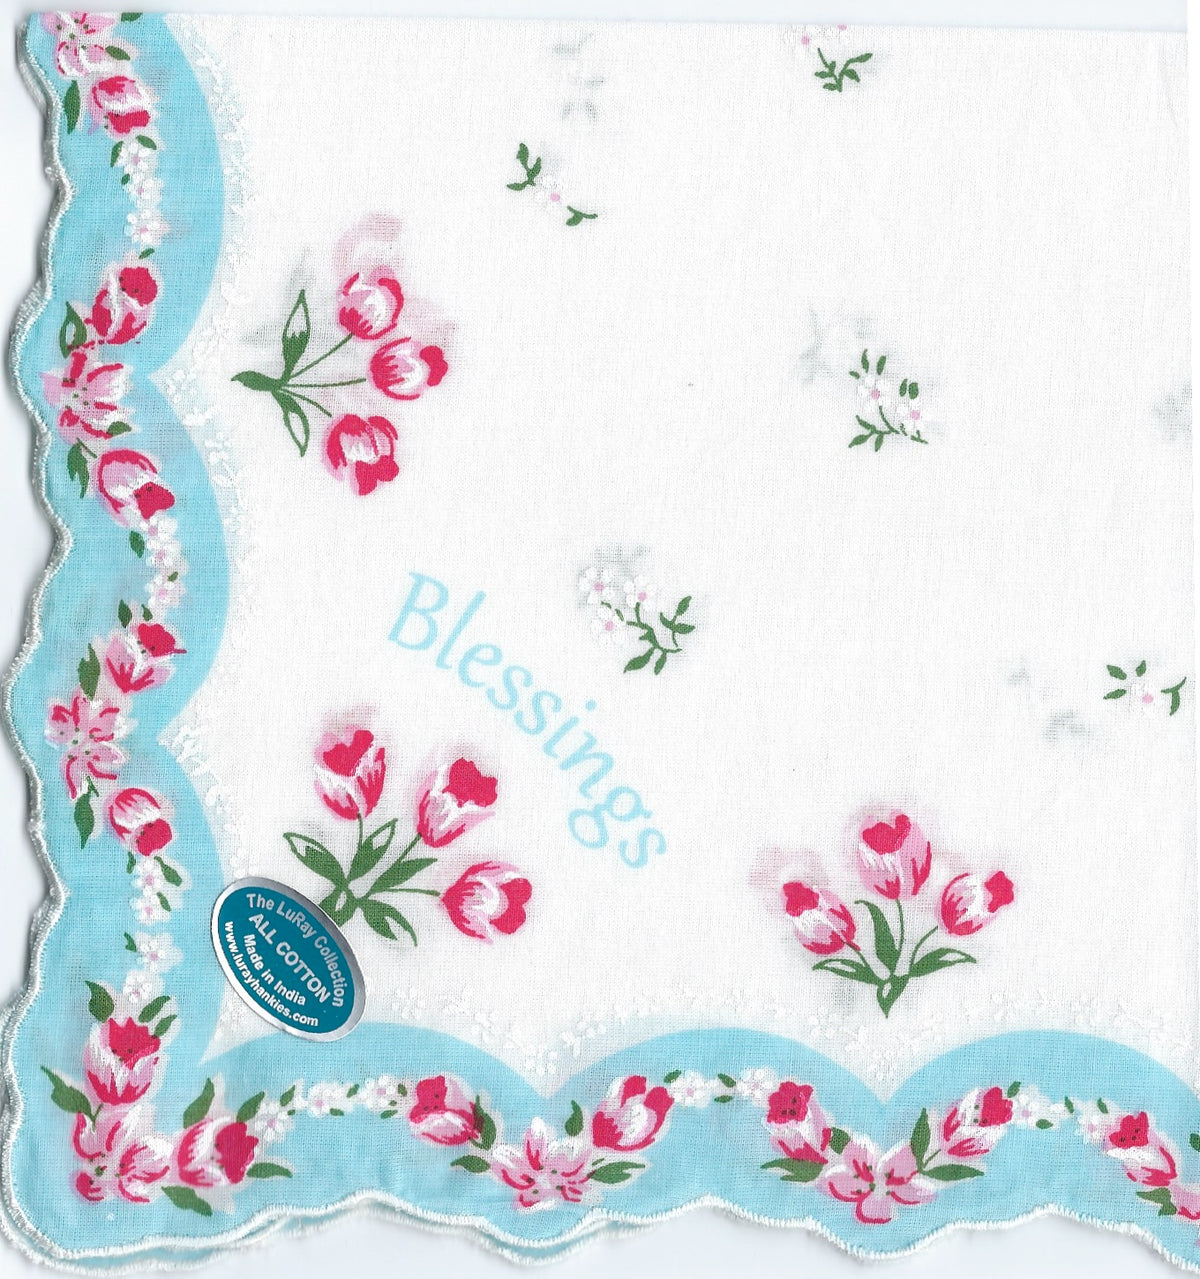 A decorative hanky with floral patterns and the word "blessings" in blue, framed by pink flowers and light green leaves on a white background, featuring a blue scalloped edge, crafted by Hankies ala Carte.